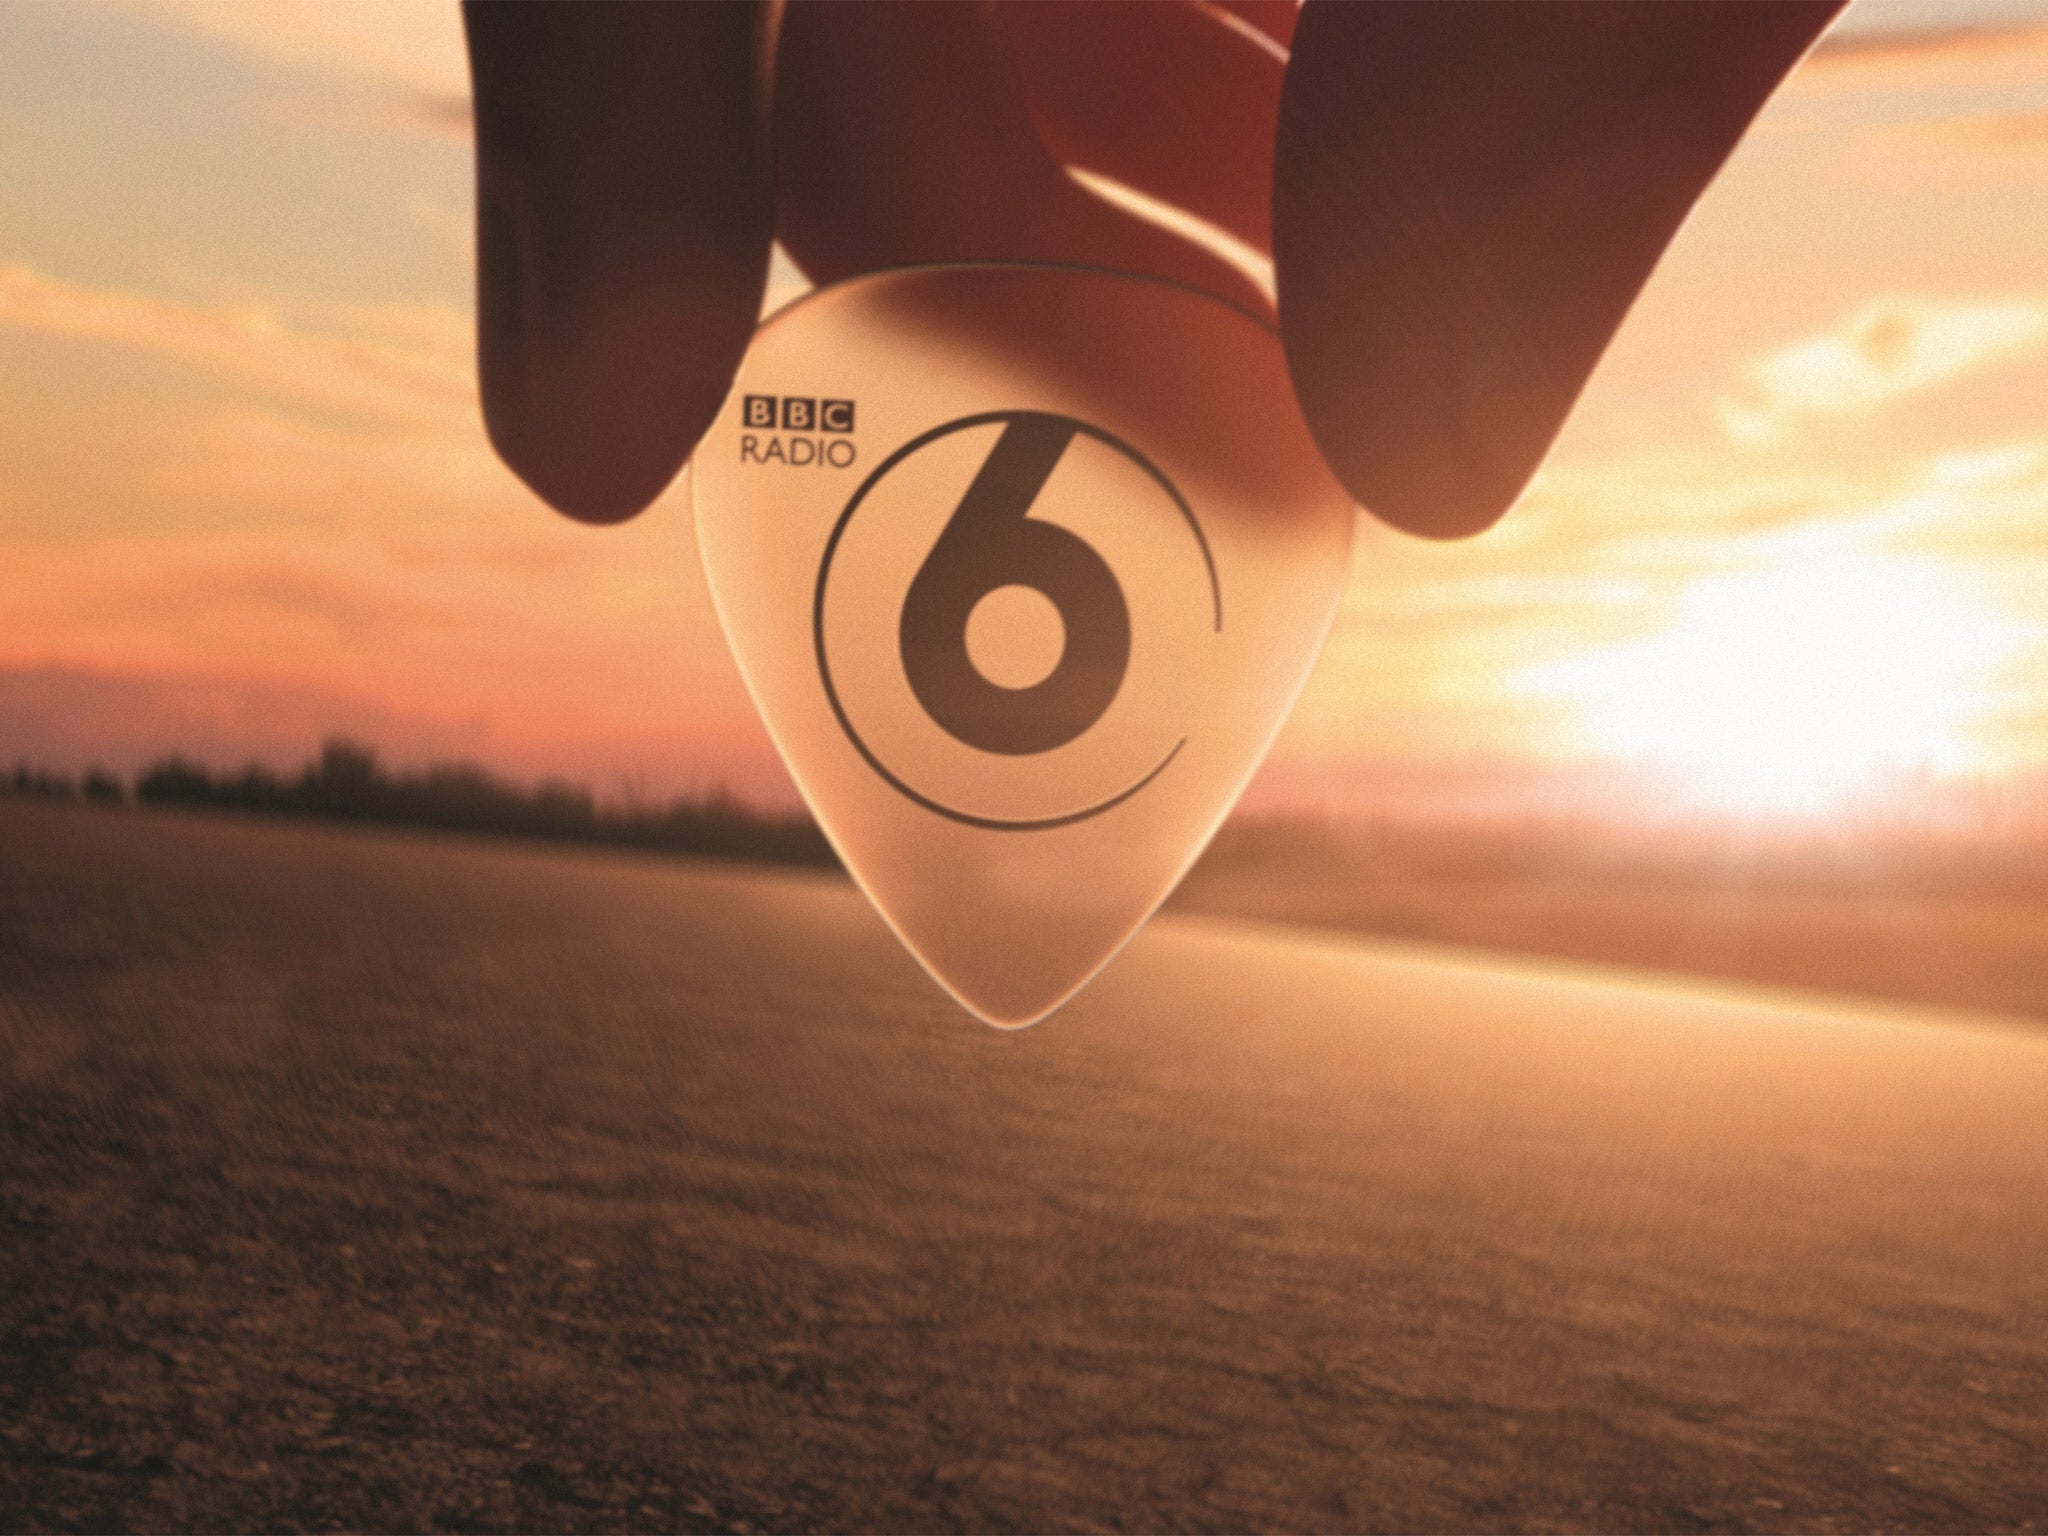 The 6 Music audience has doubled since a campaign to save it from closure